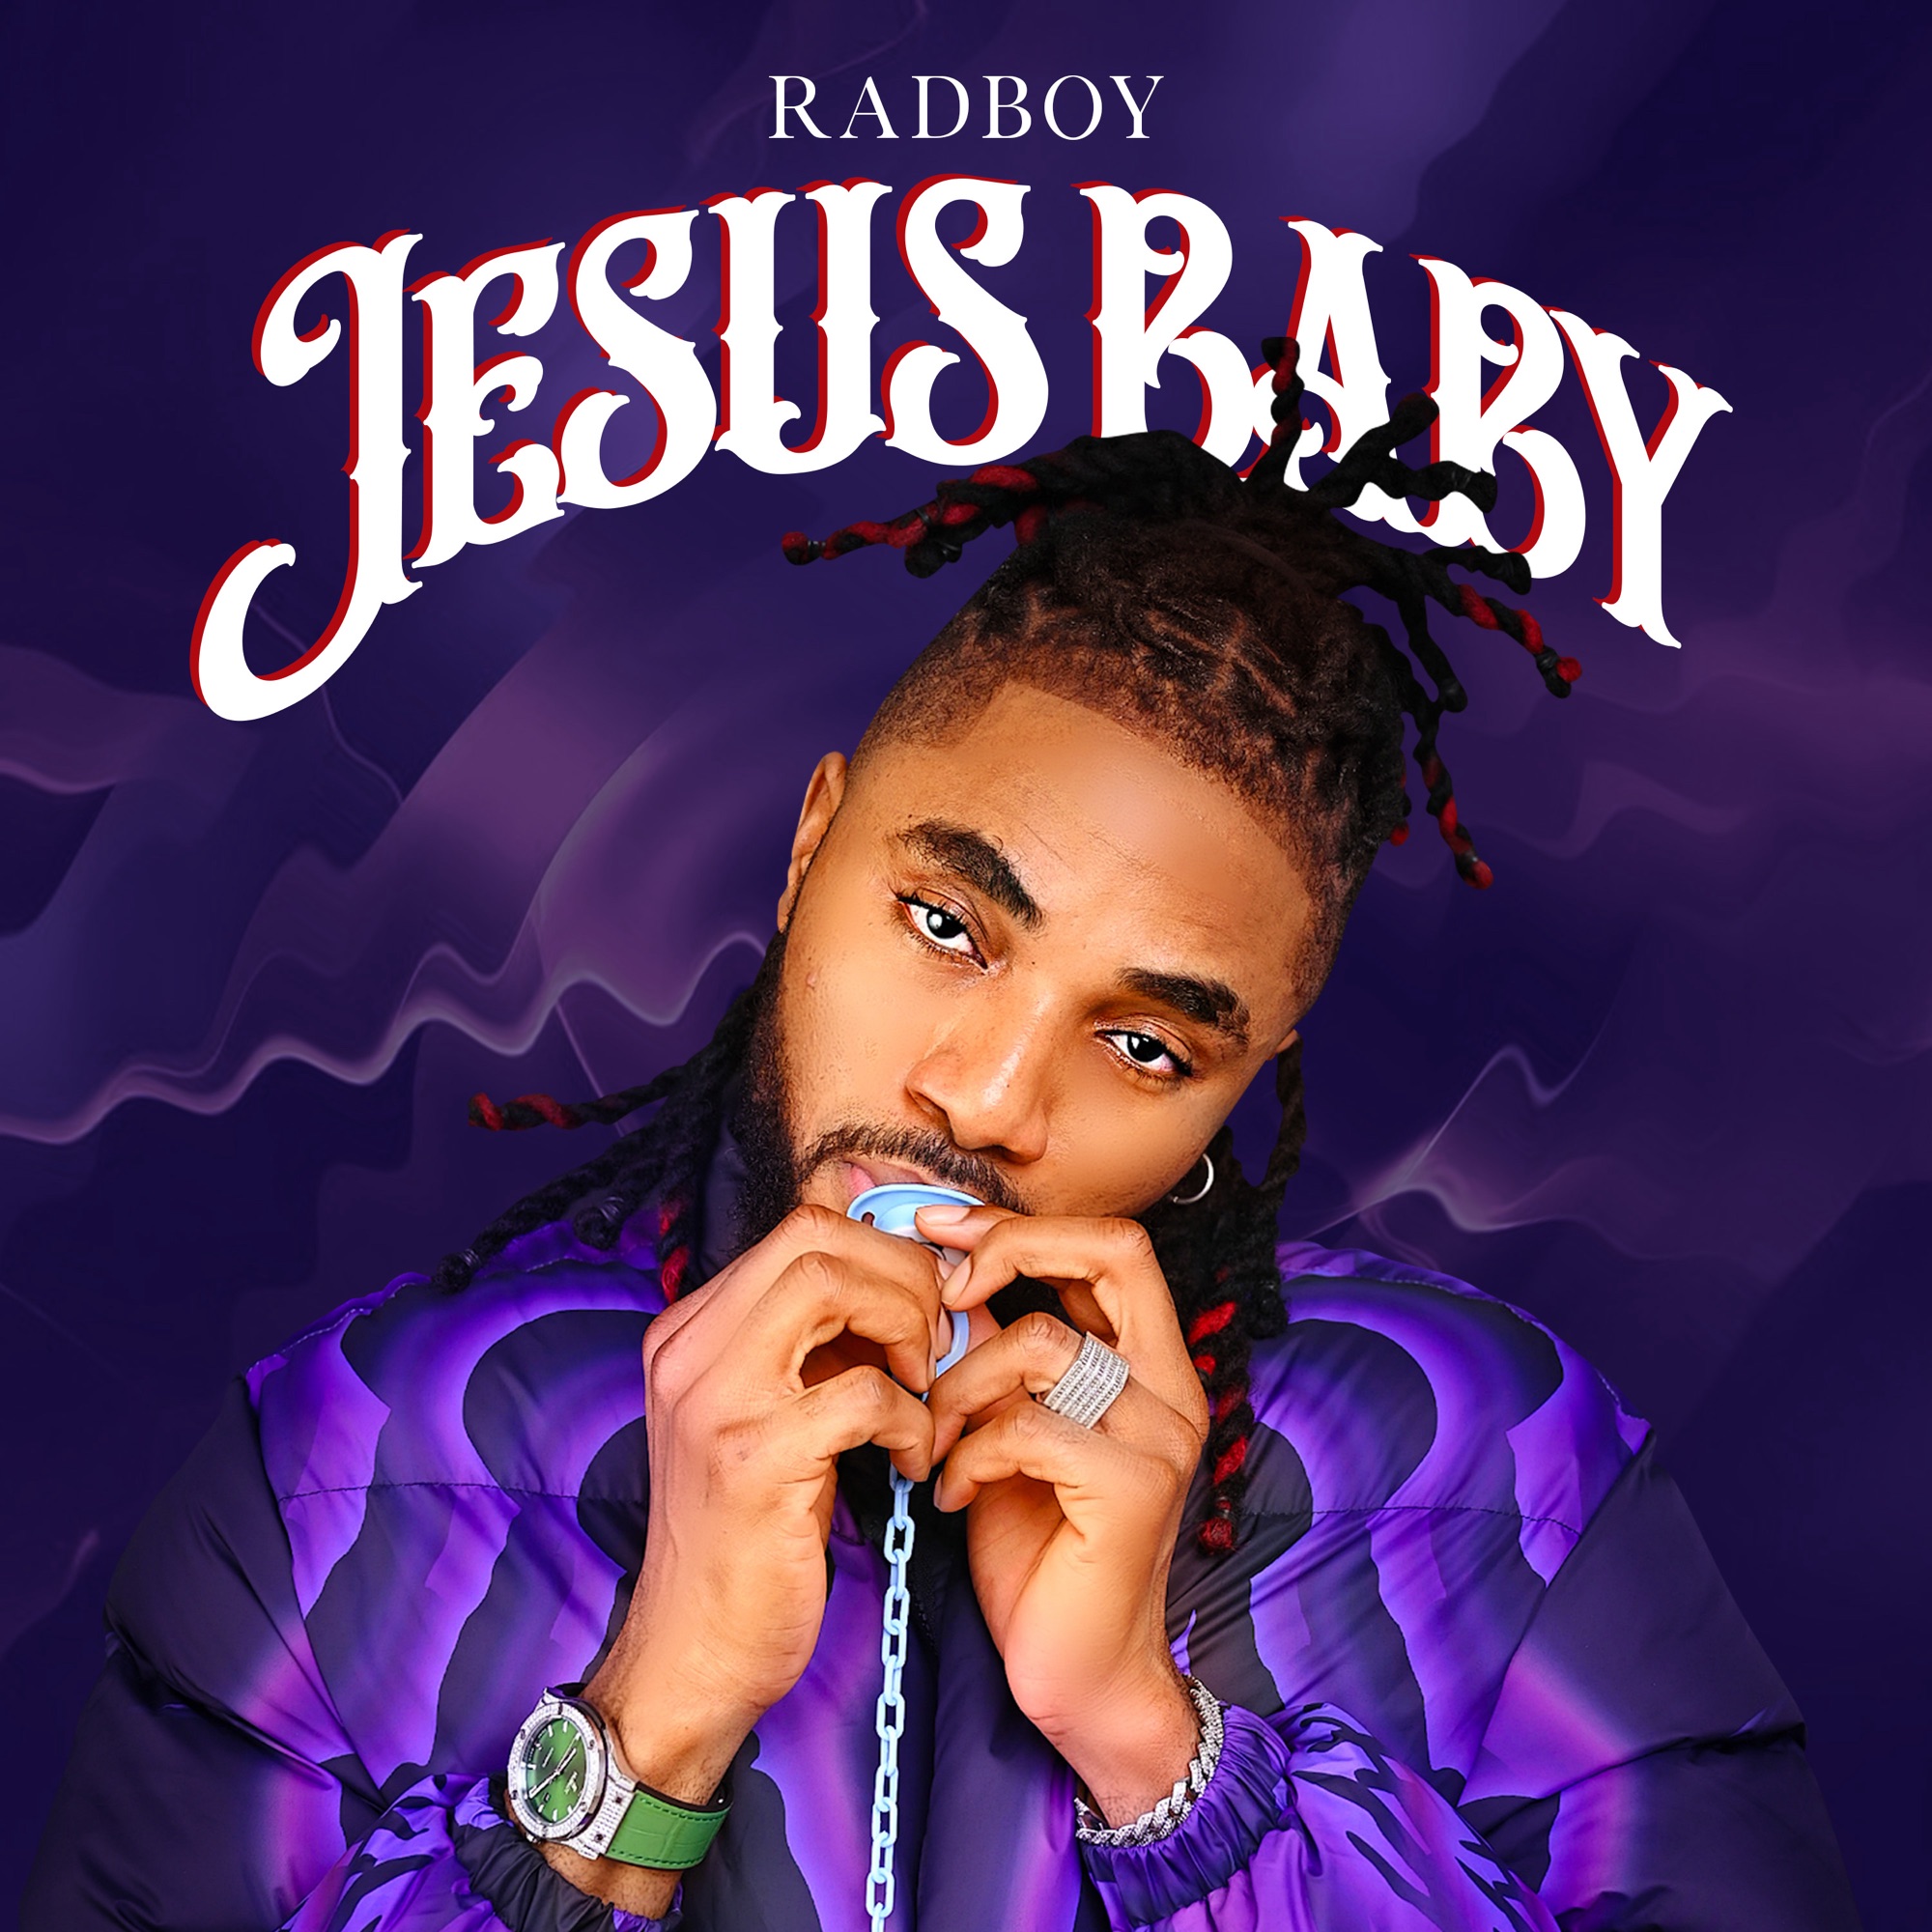 Rad Boy resurfaces with brand new song “Jesus Baby”